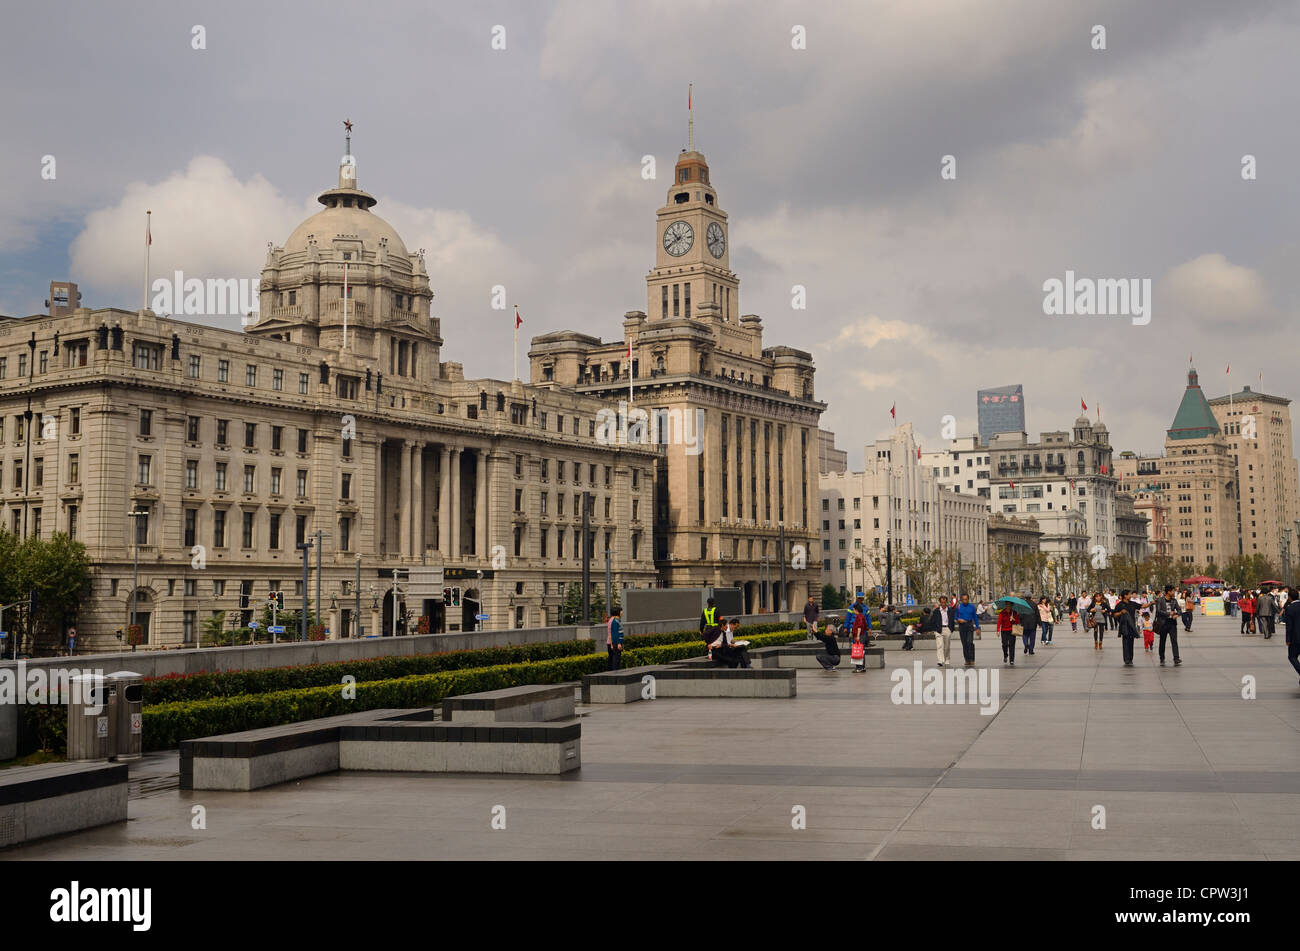 Tourists walking on a wet Bund promenade with old buildings in Shanghai Peoples Republic of China Stock Photo